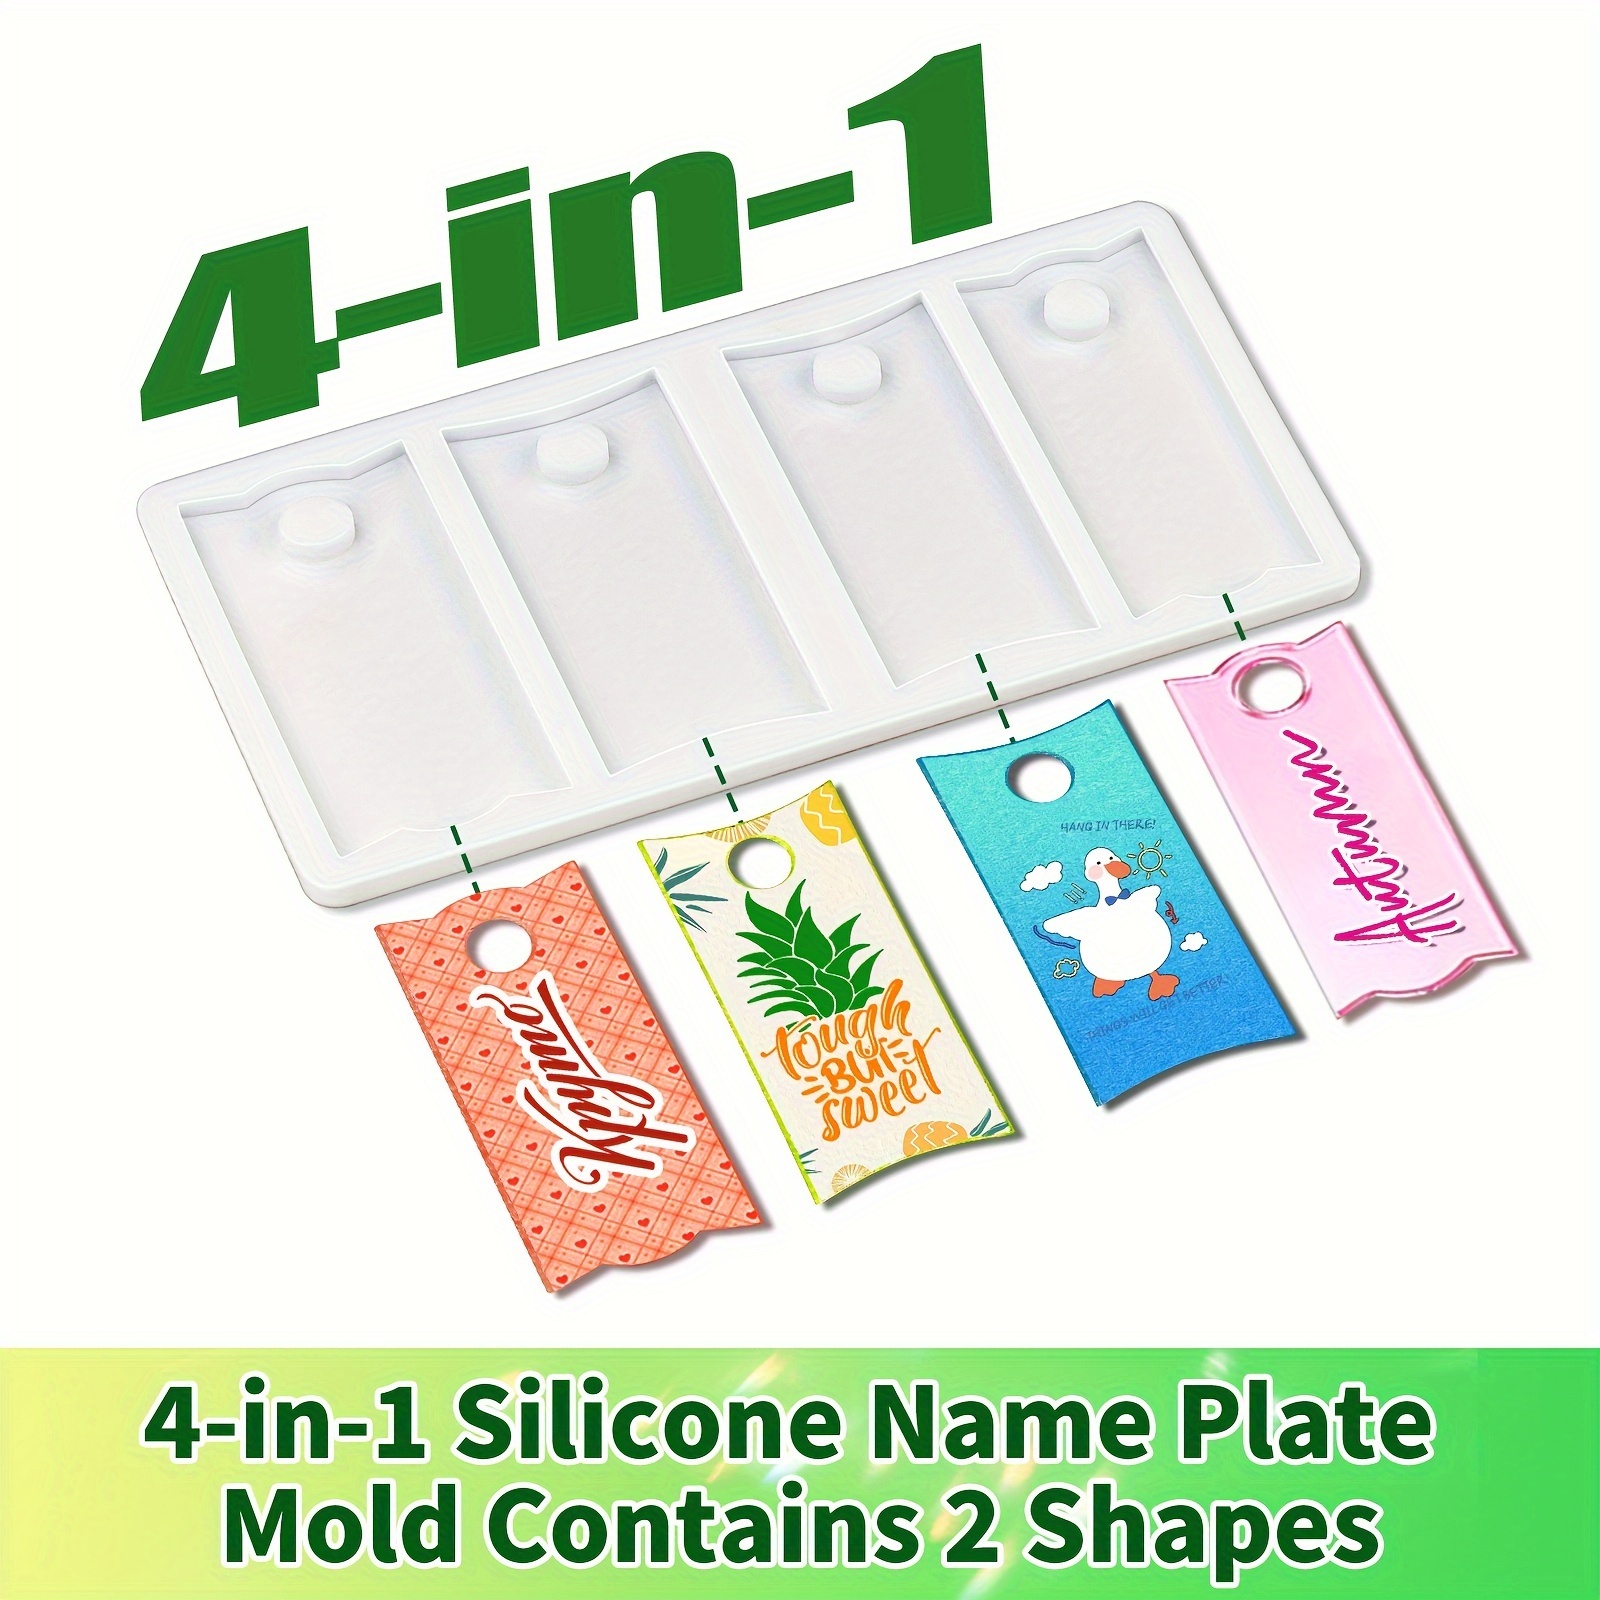 Stanley name plate mold silicone｜TikTok Search